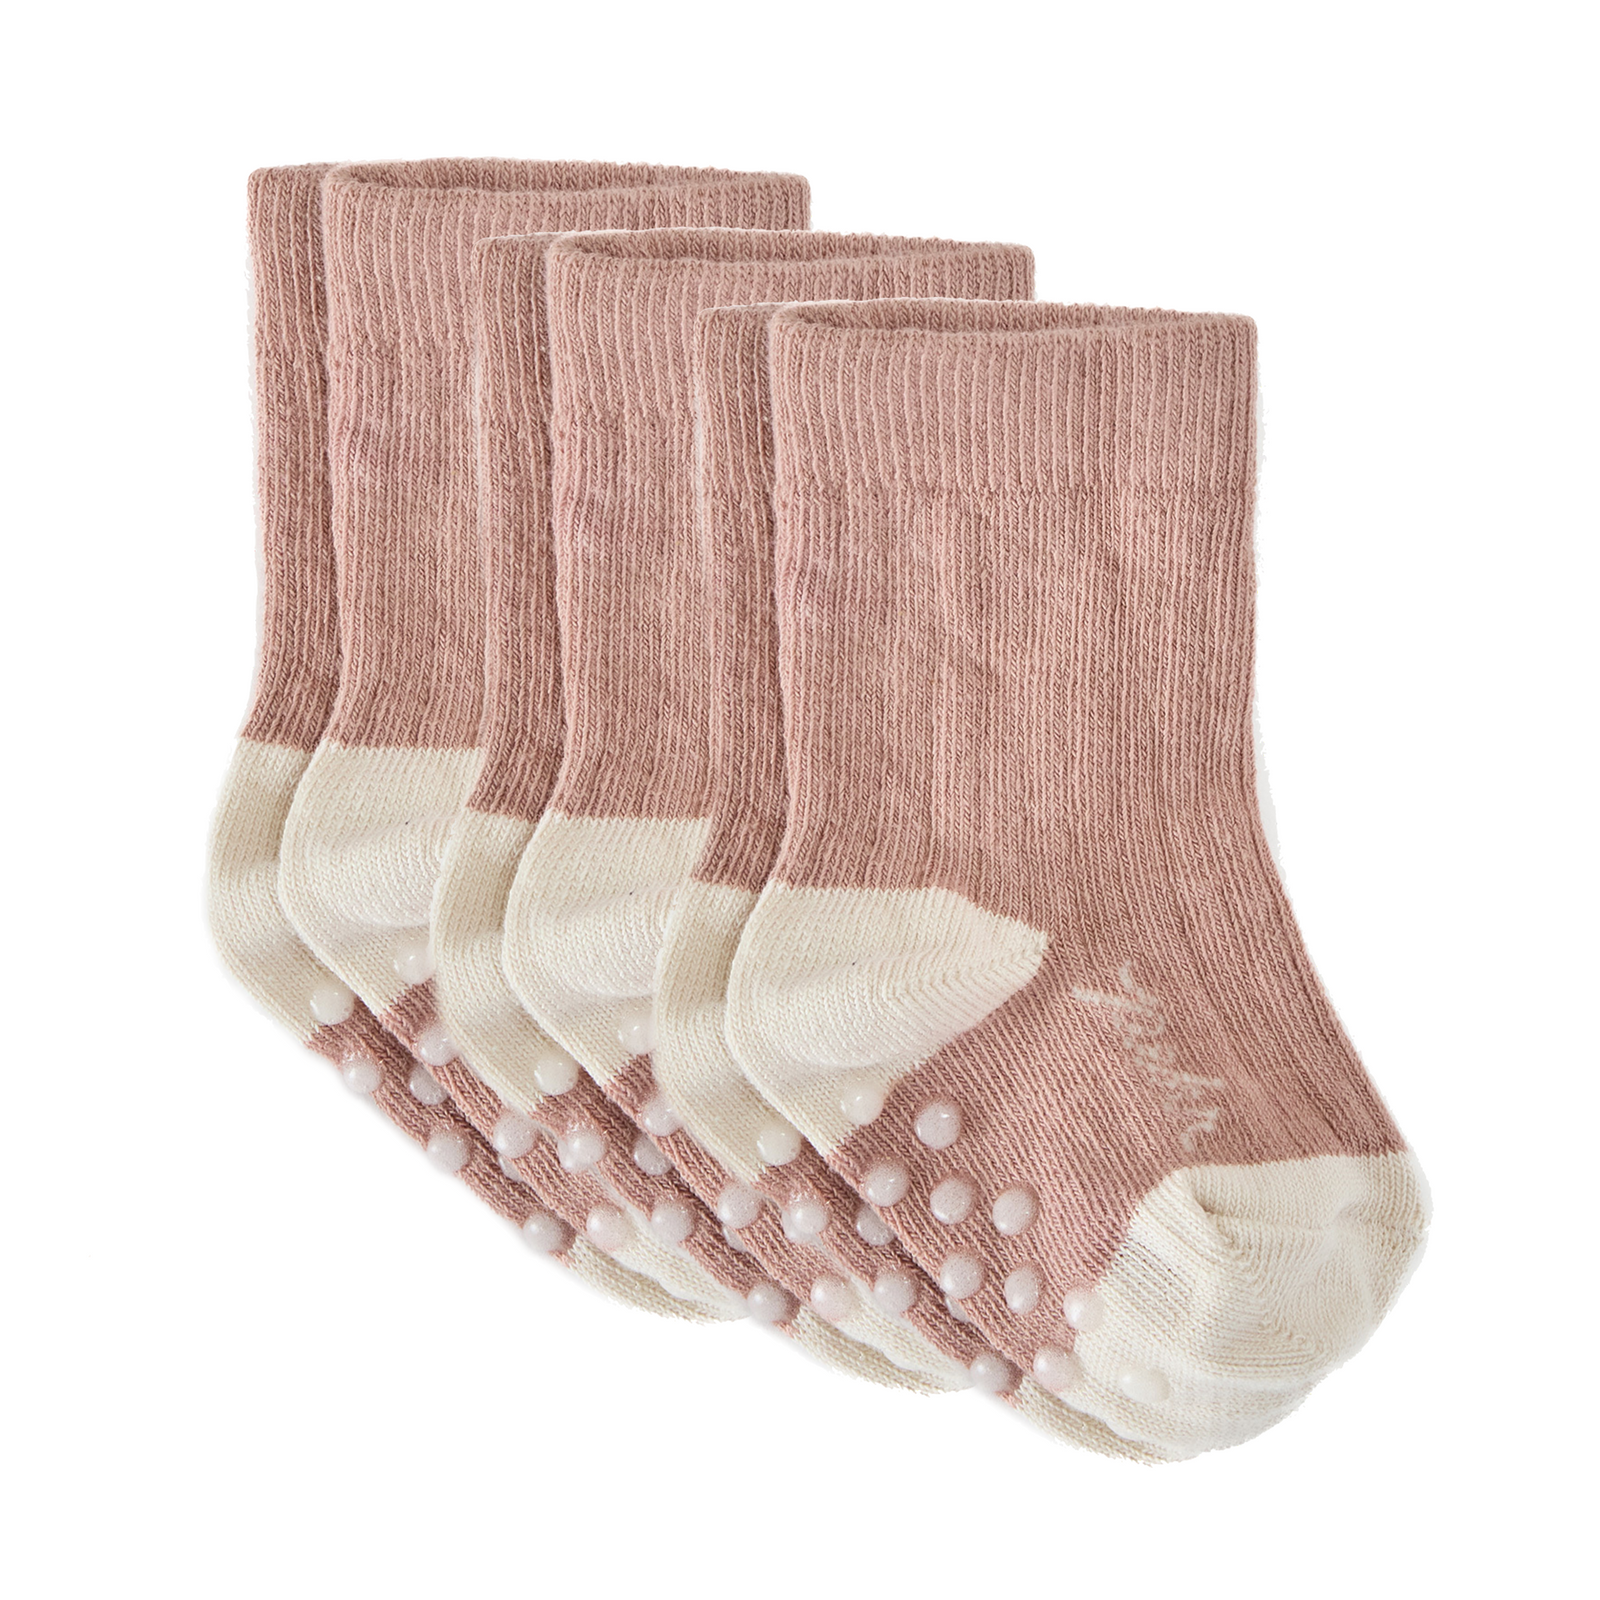 Crew Socks with Grips 3 - Pack 3-Piece Set Pehr Canada Blossom Set 0 - 6 mos. 